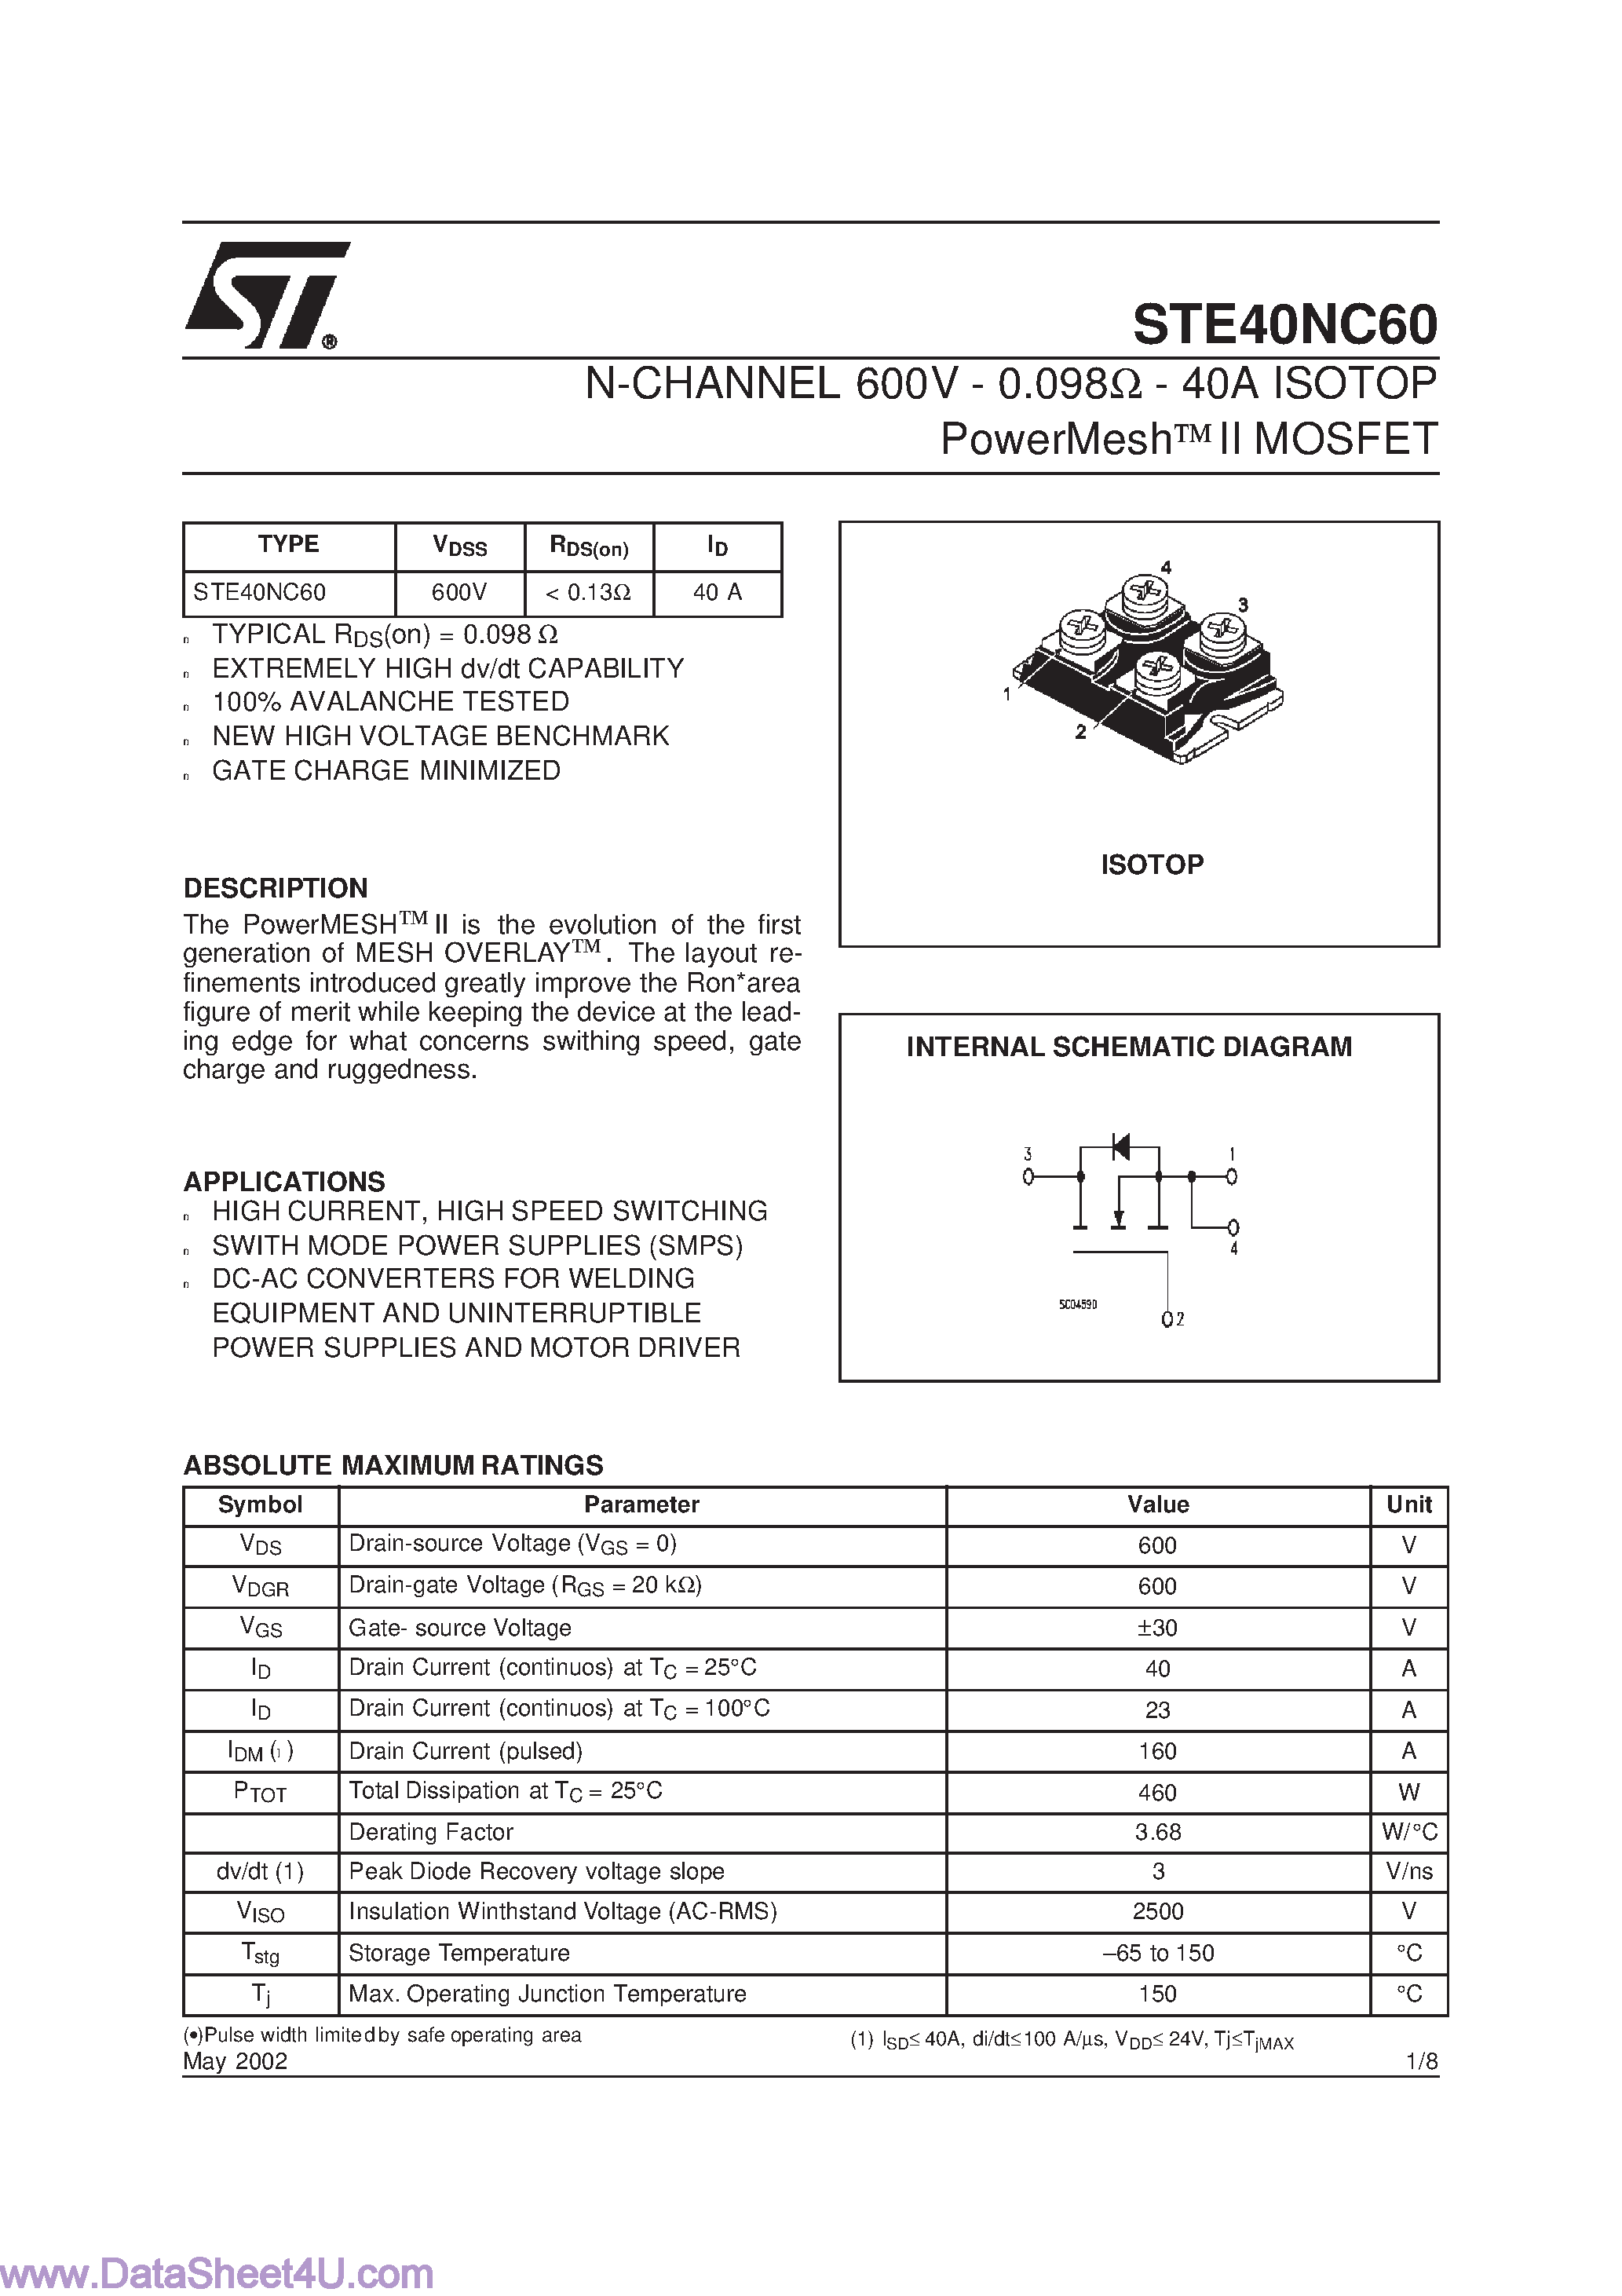 Даташит STE40NC60 - N-CHANNEL Power MOSFET страница 1